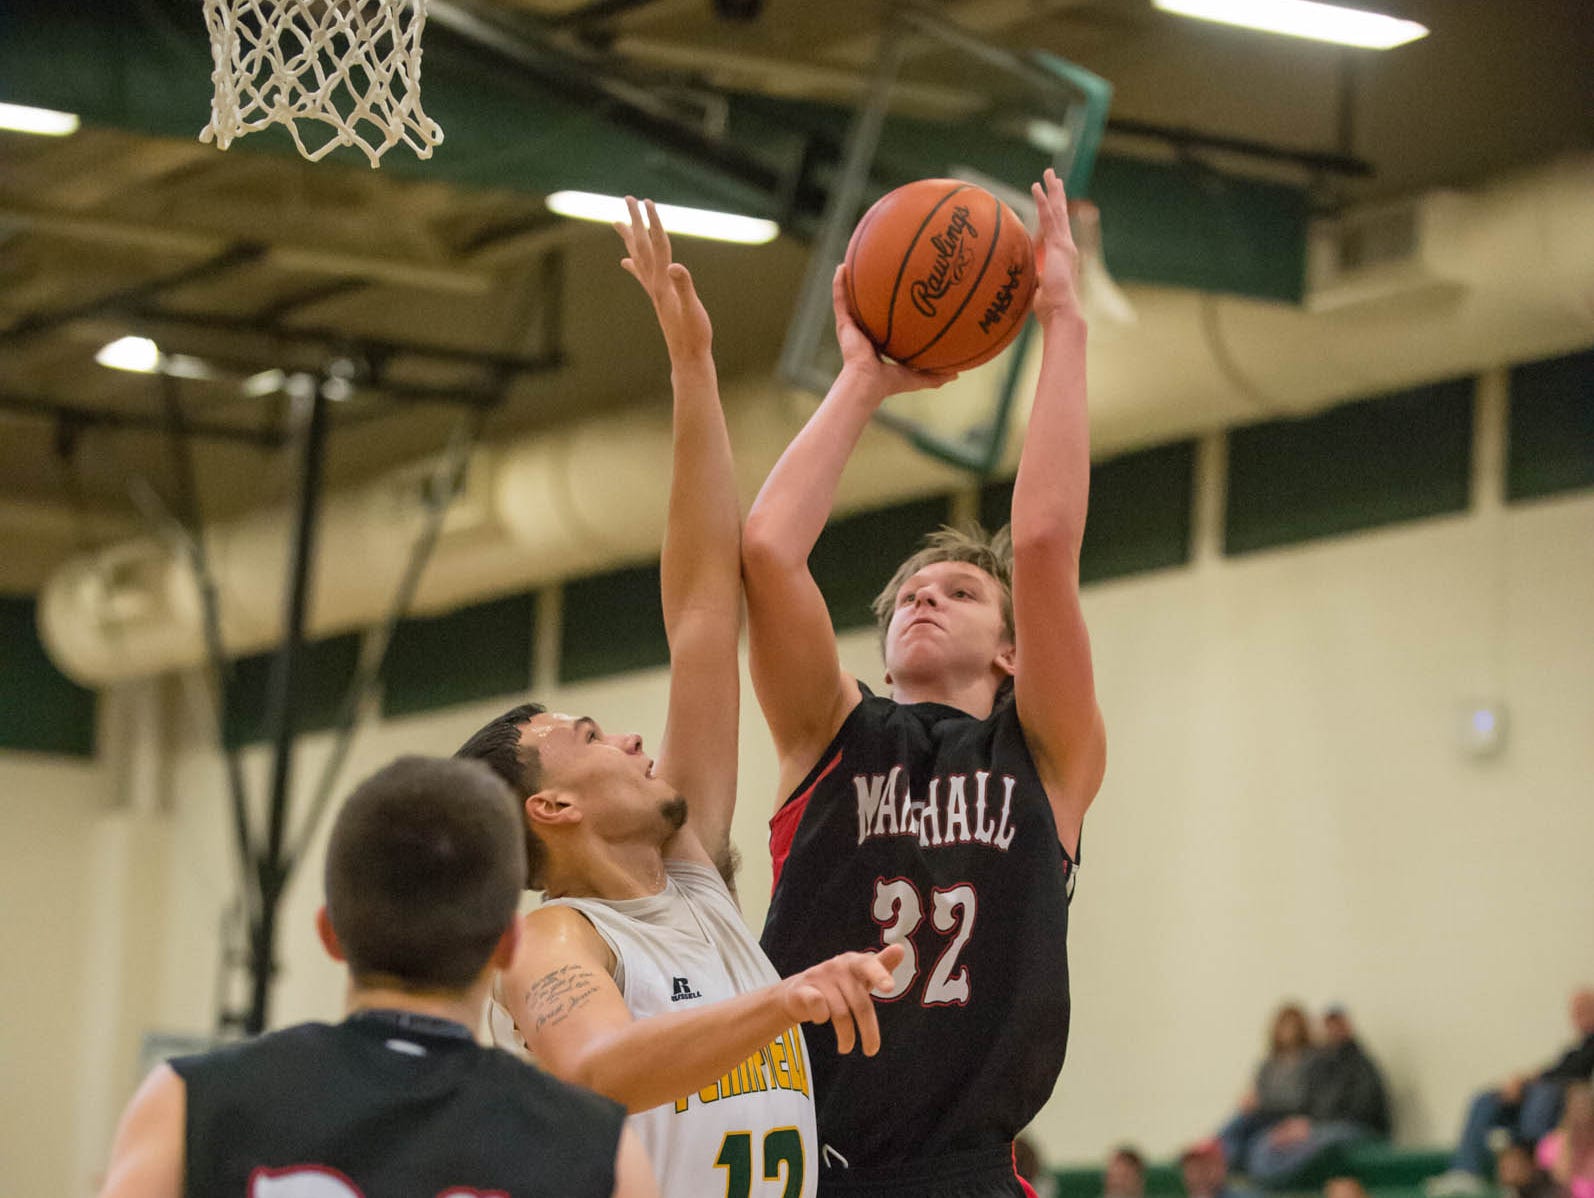 Marshall's Mitch Avery (32) takes a shot during Friday night's game.